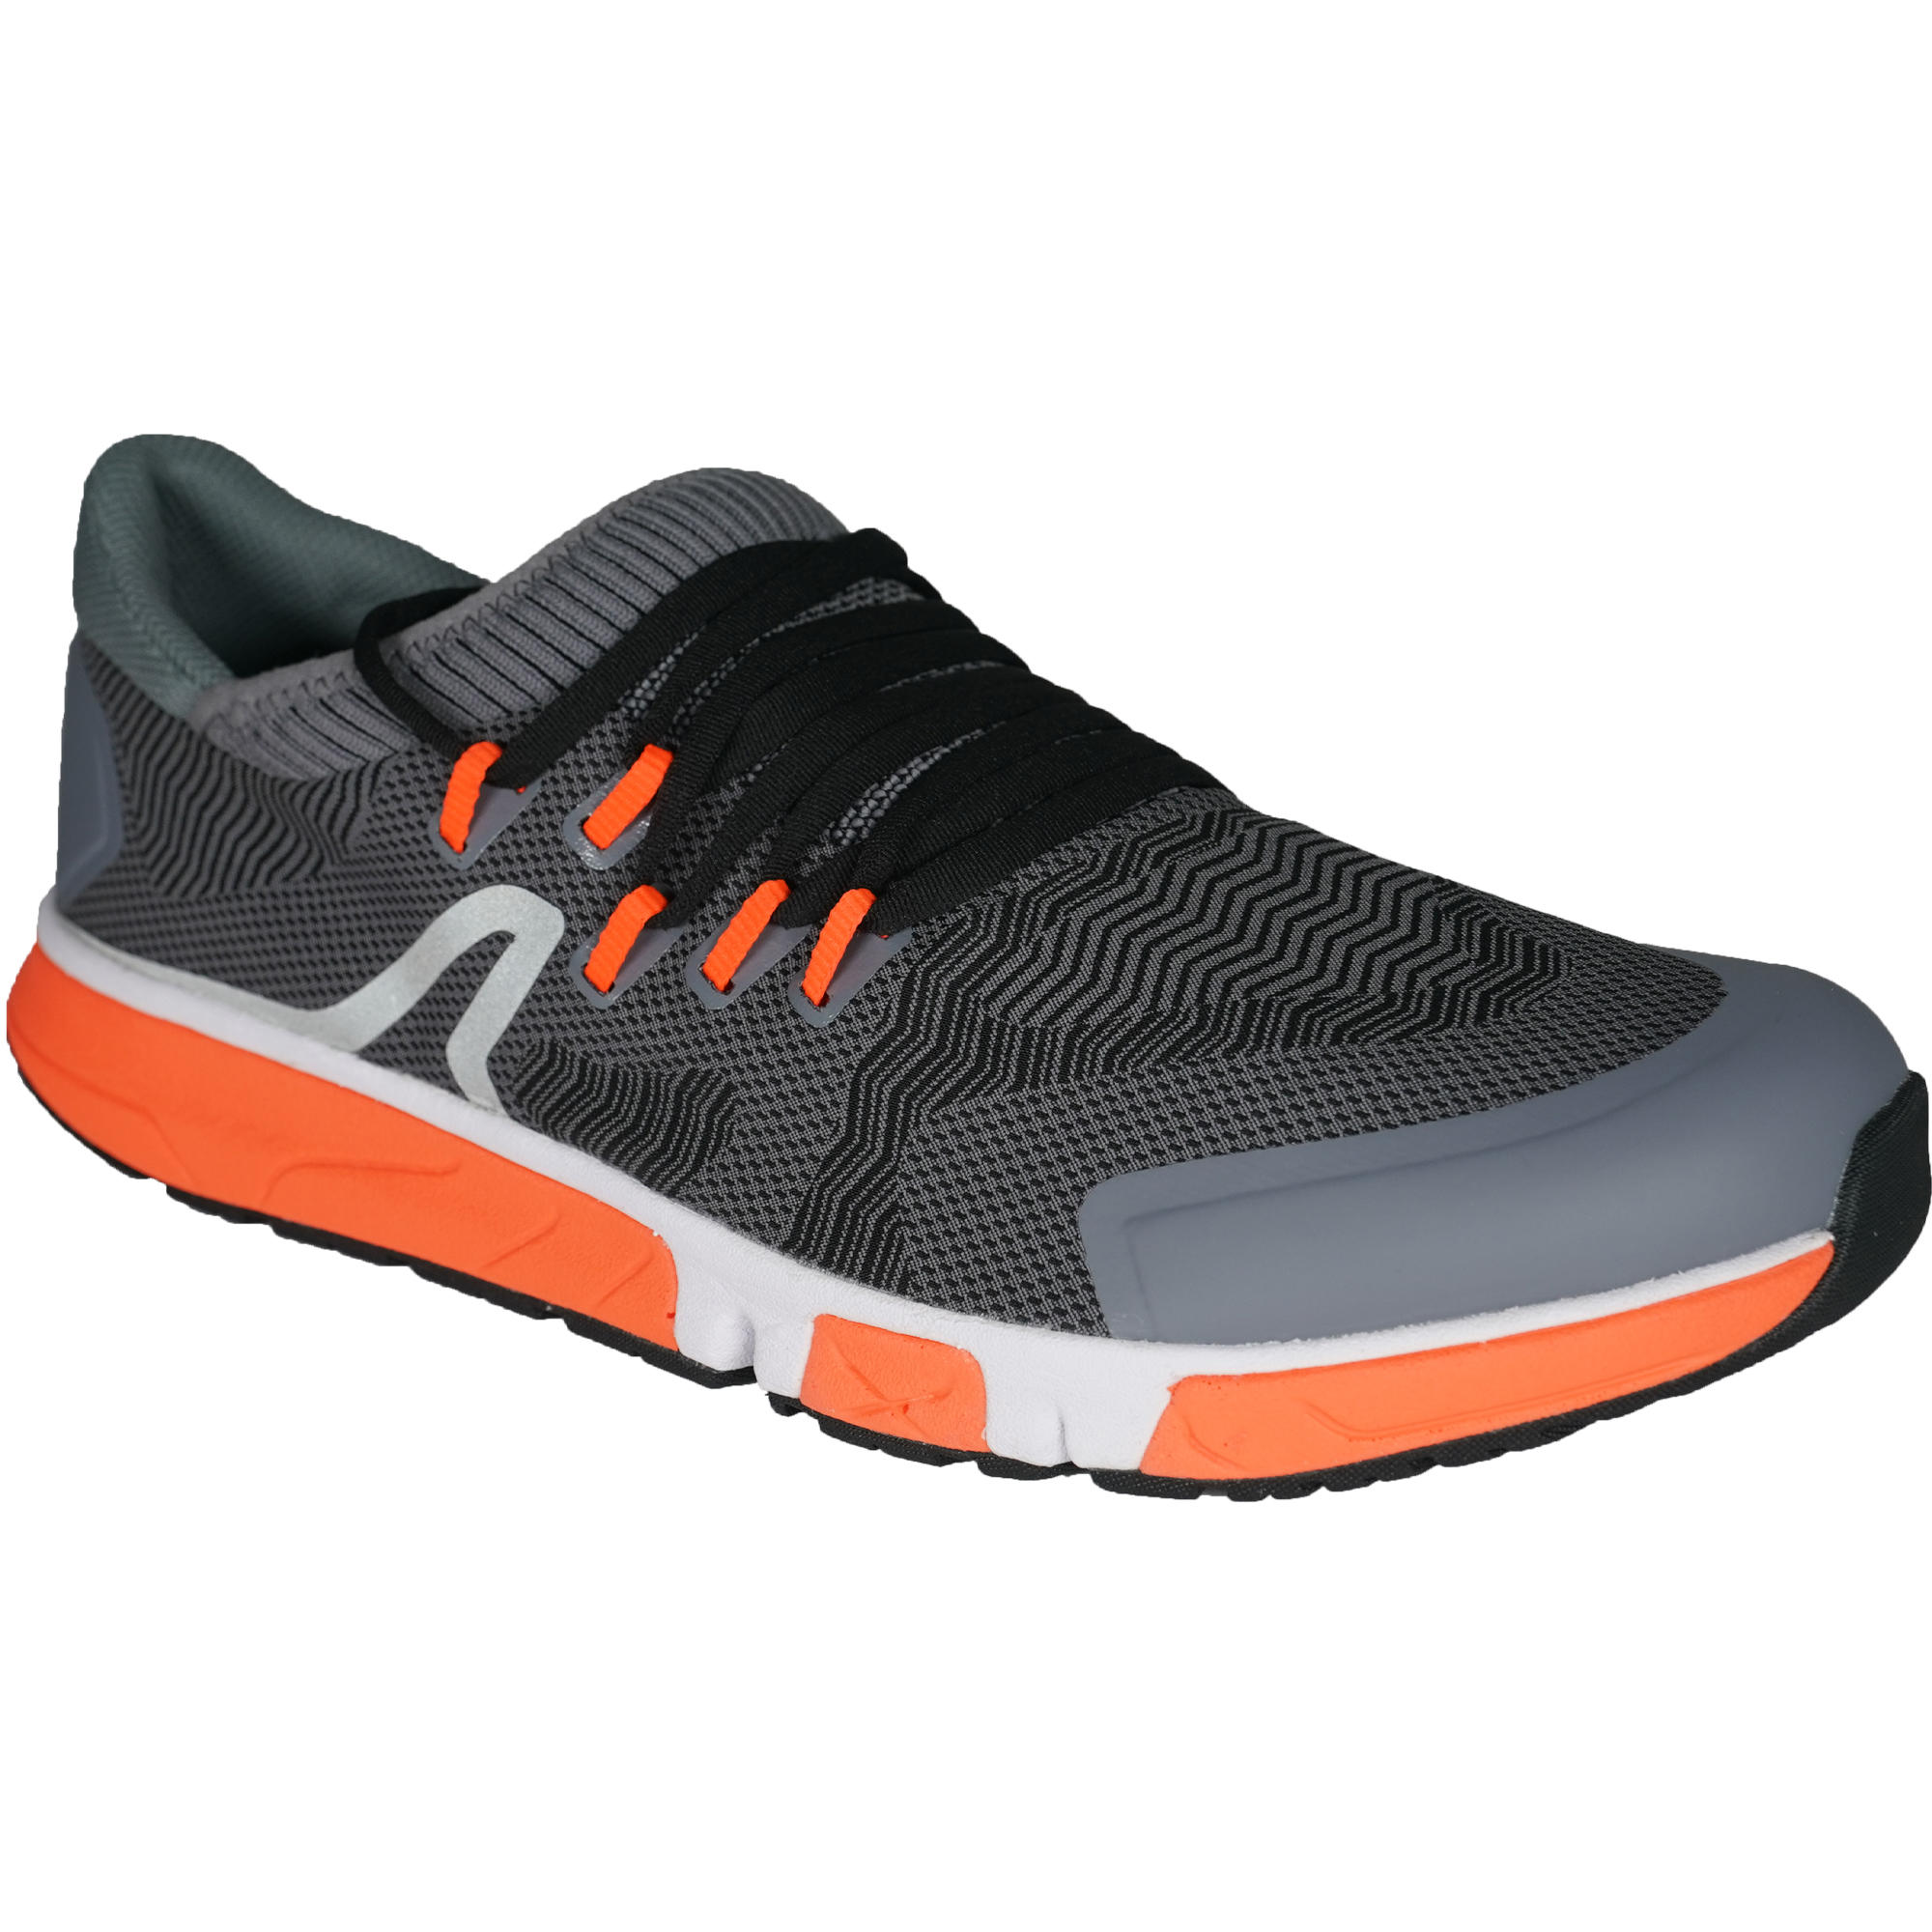 long-distance fitness walking shoes 